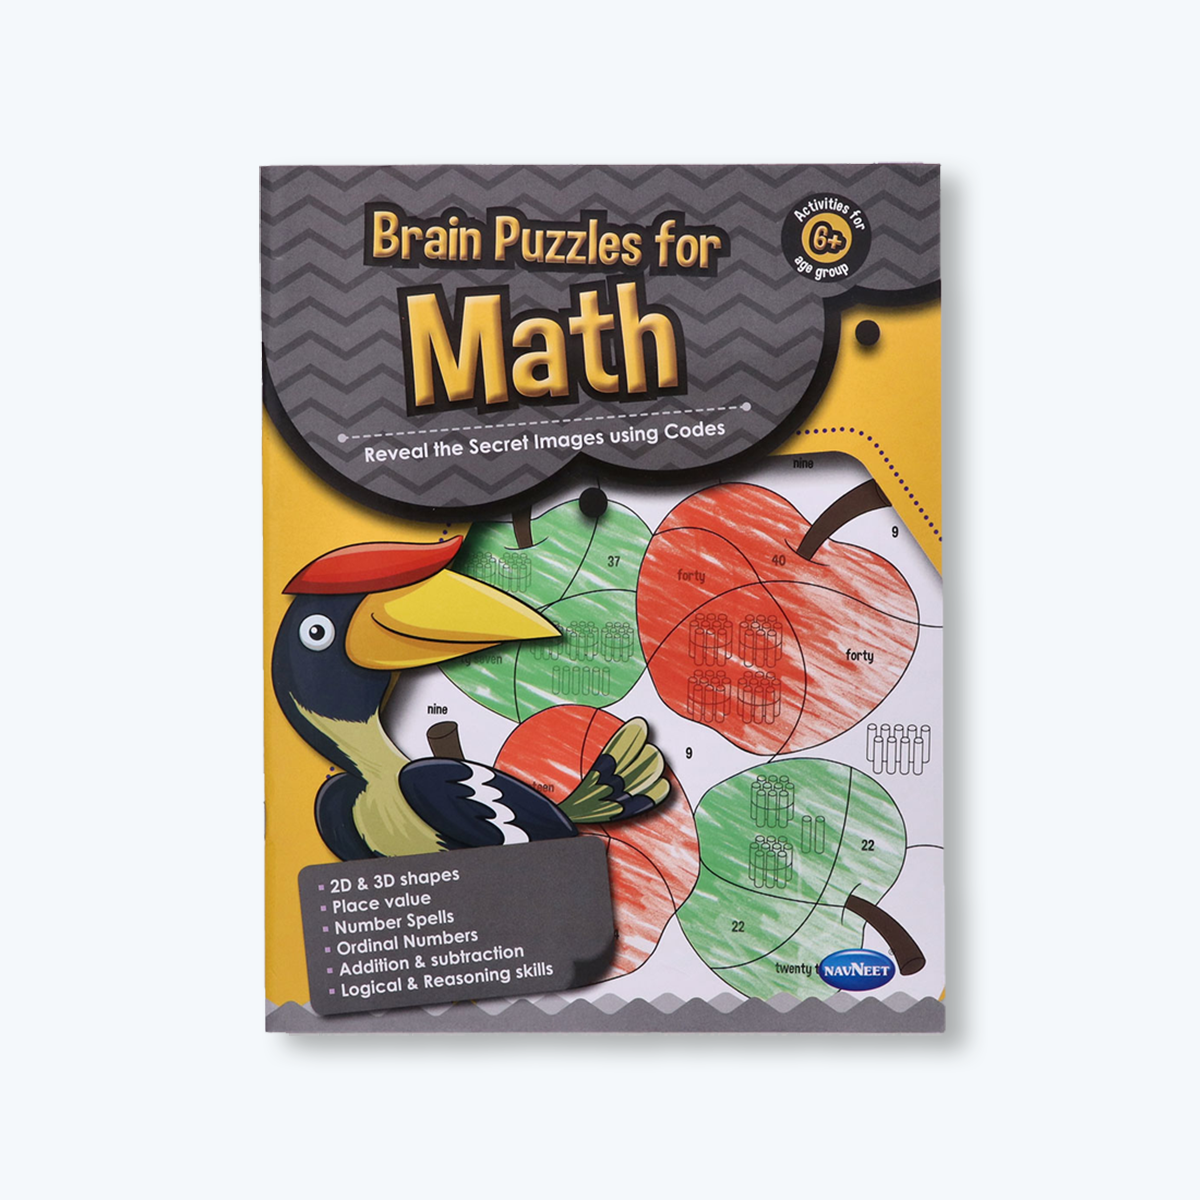 Navneet Brain Puzzle Activity Books - Brain activities for kids - Foundational Literacy & Numeracy books - Age 6+
 Educational - Phonics, spells, Numbers, Add, Subtract